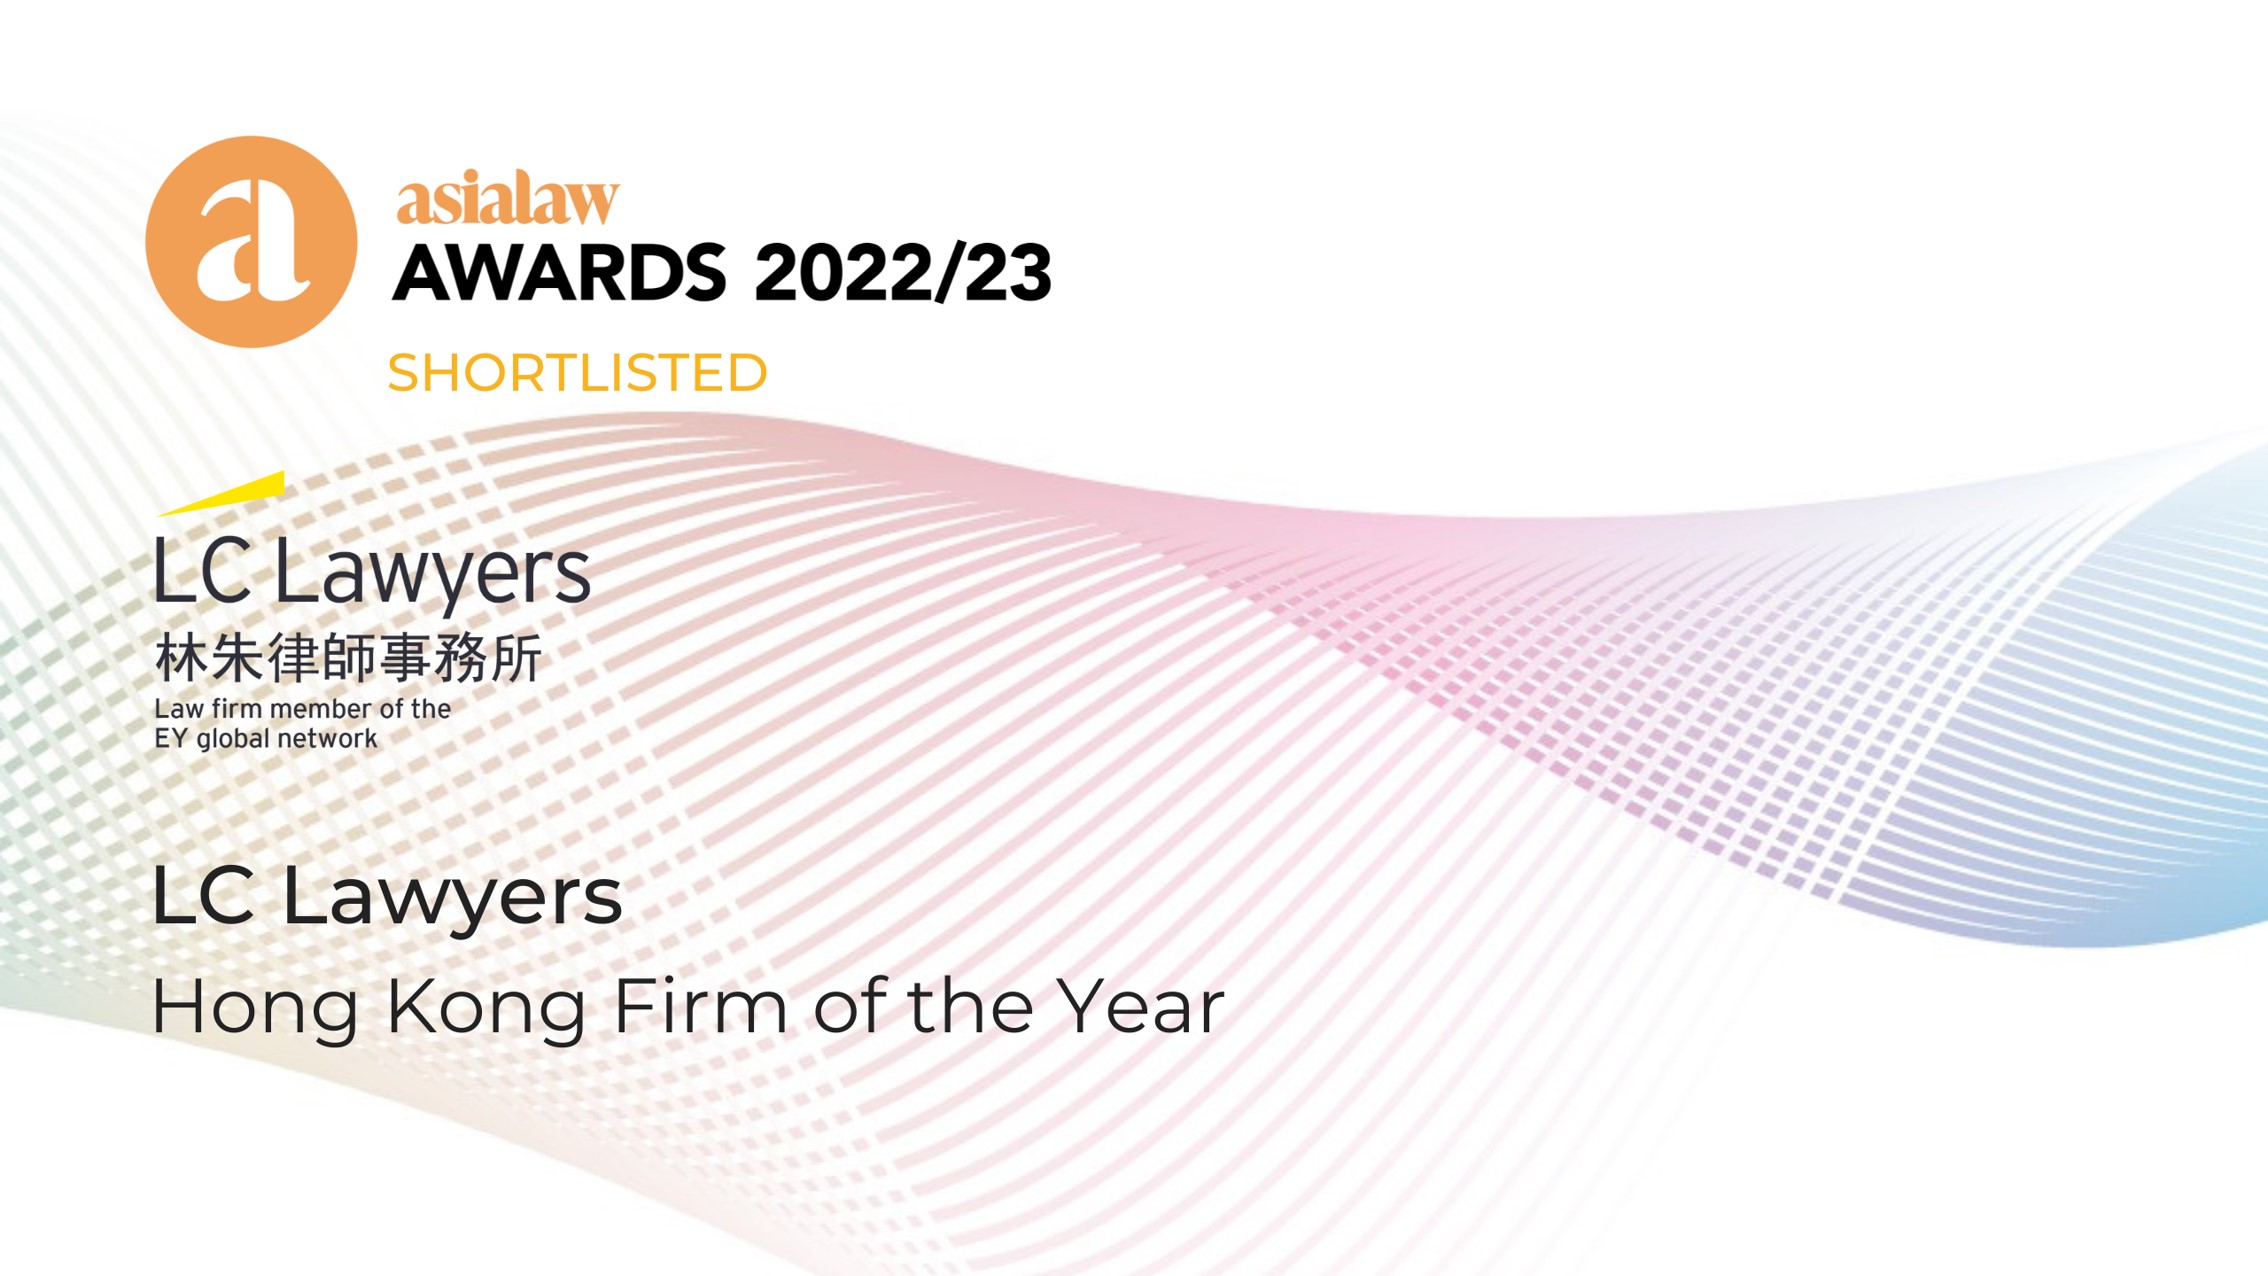 LC Lawyers shortlisted in asialaw Awards 2022/23